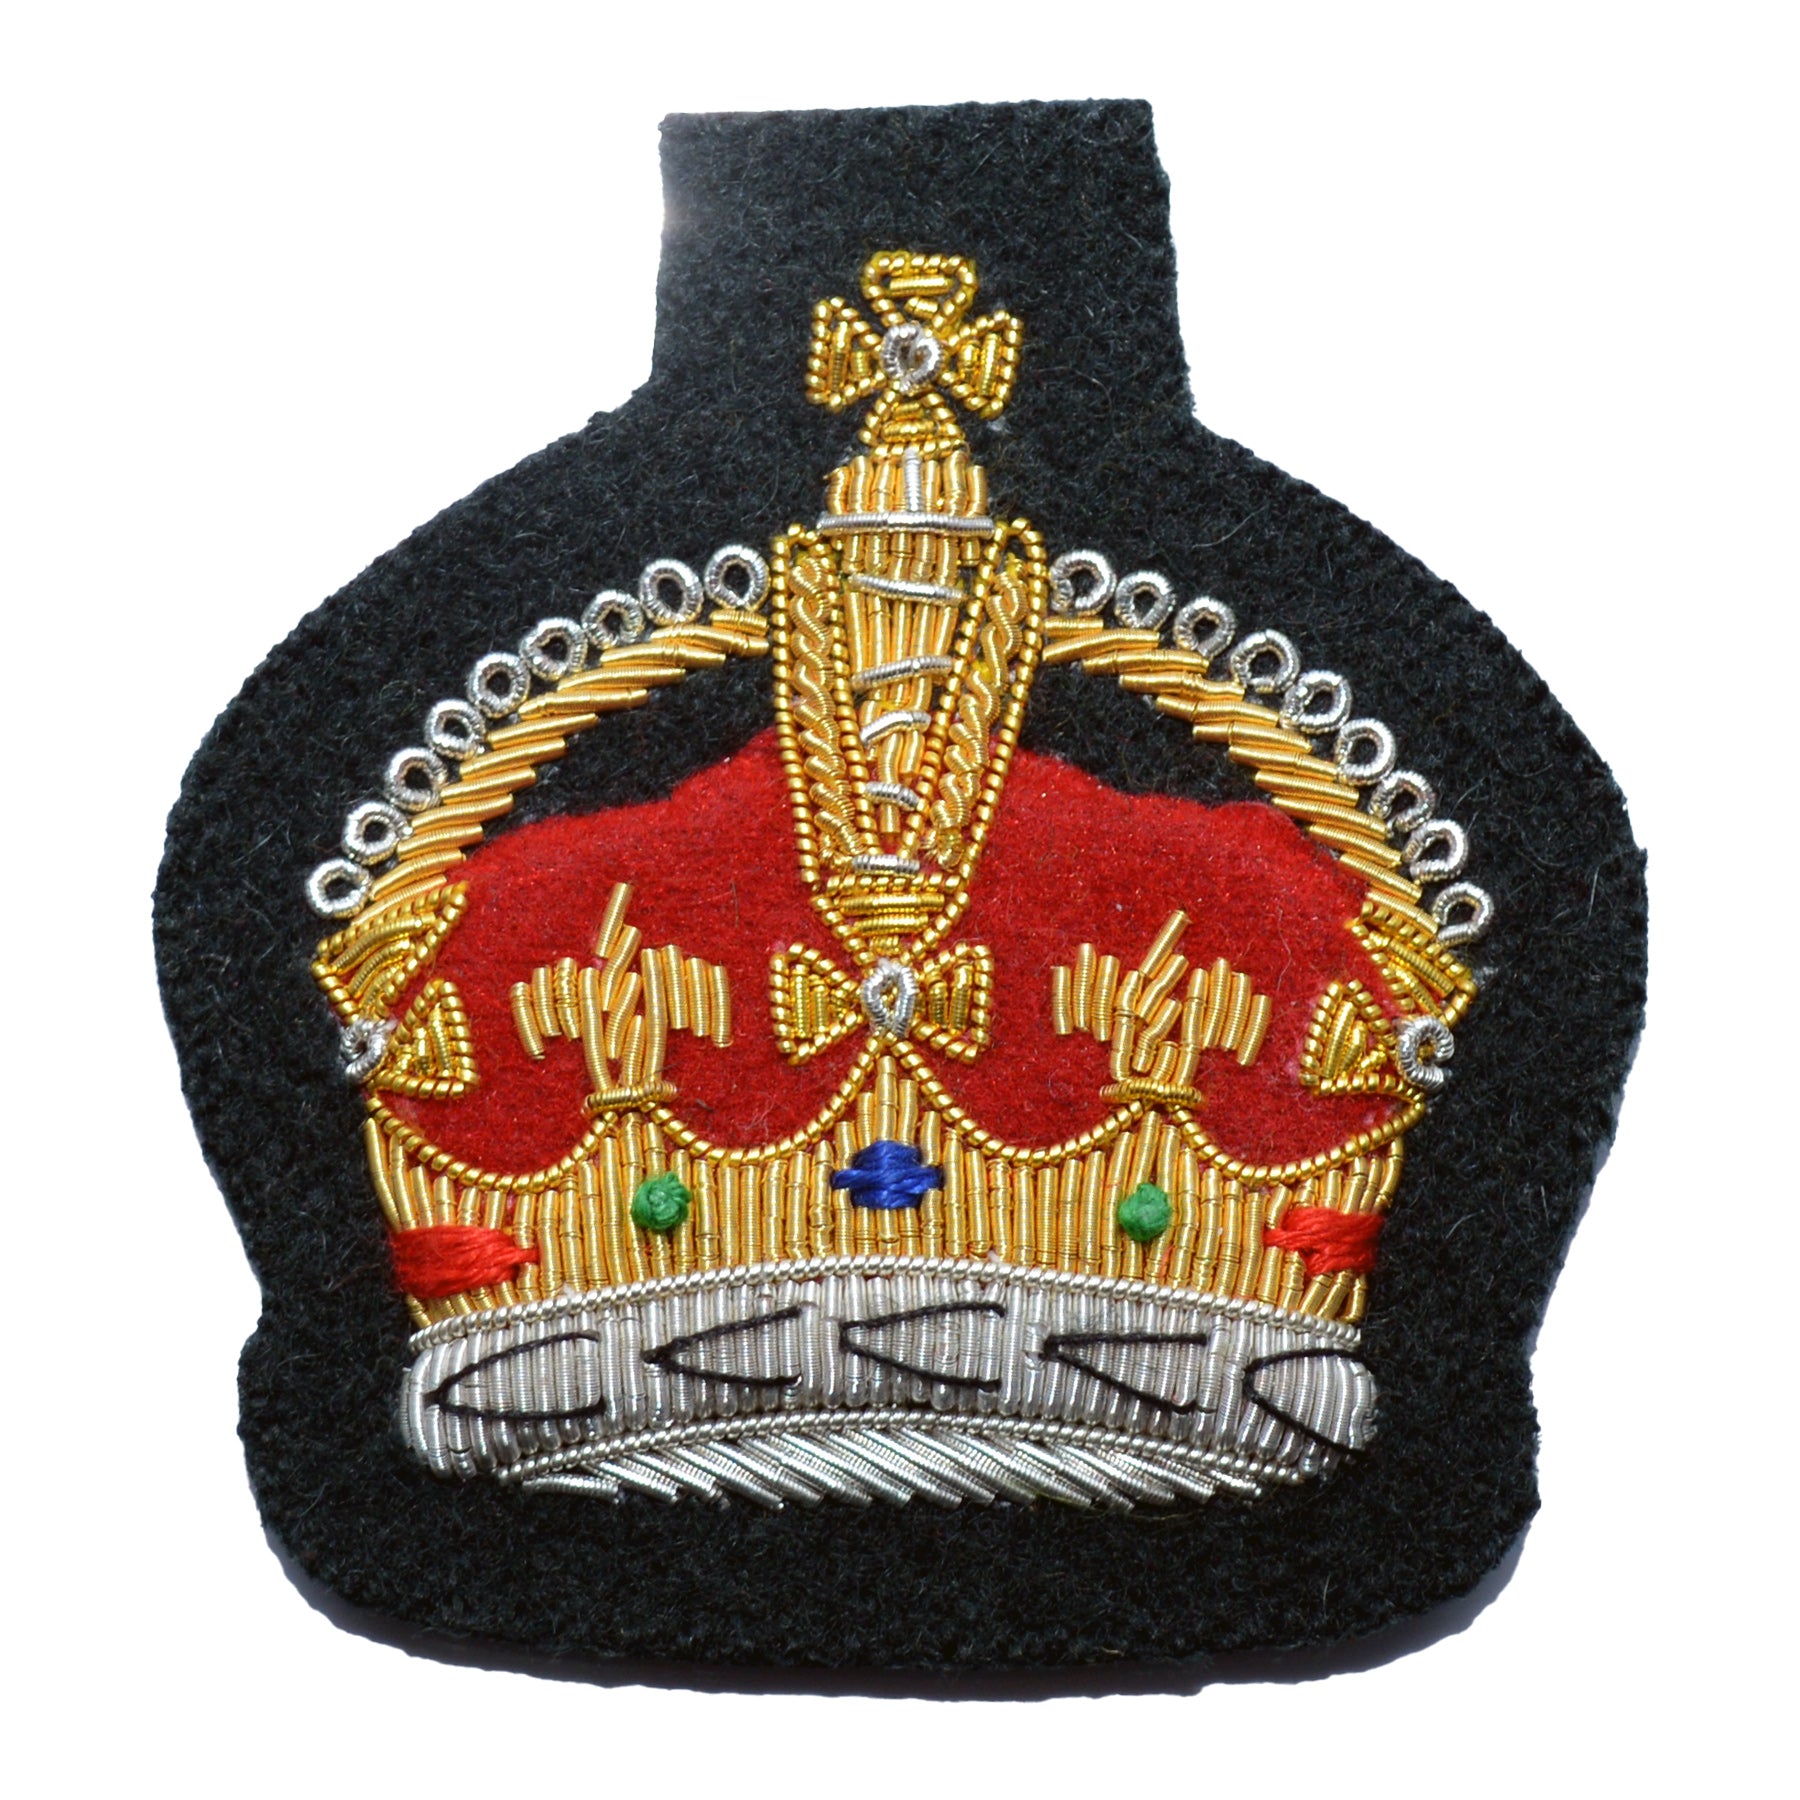 (Kings Crown) QMS, CSgt and SSgt NCO's Large Crown Rank Badge All Scottish Infantry British Army